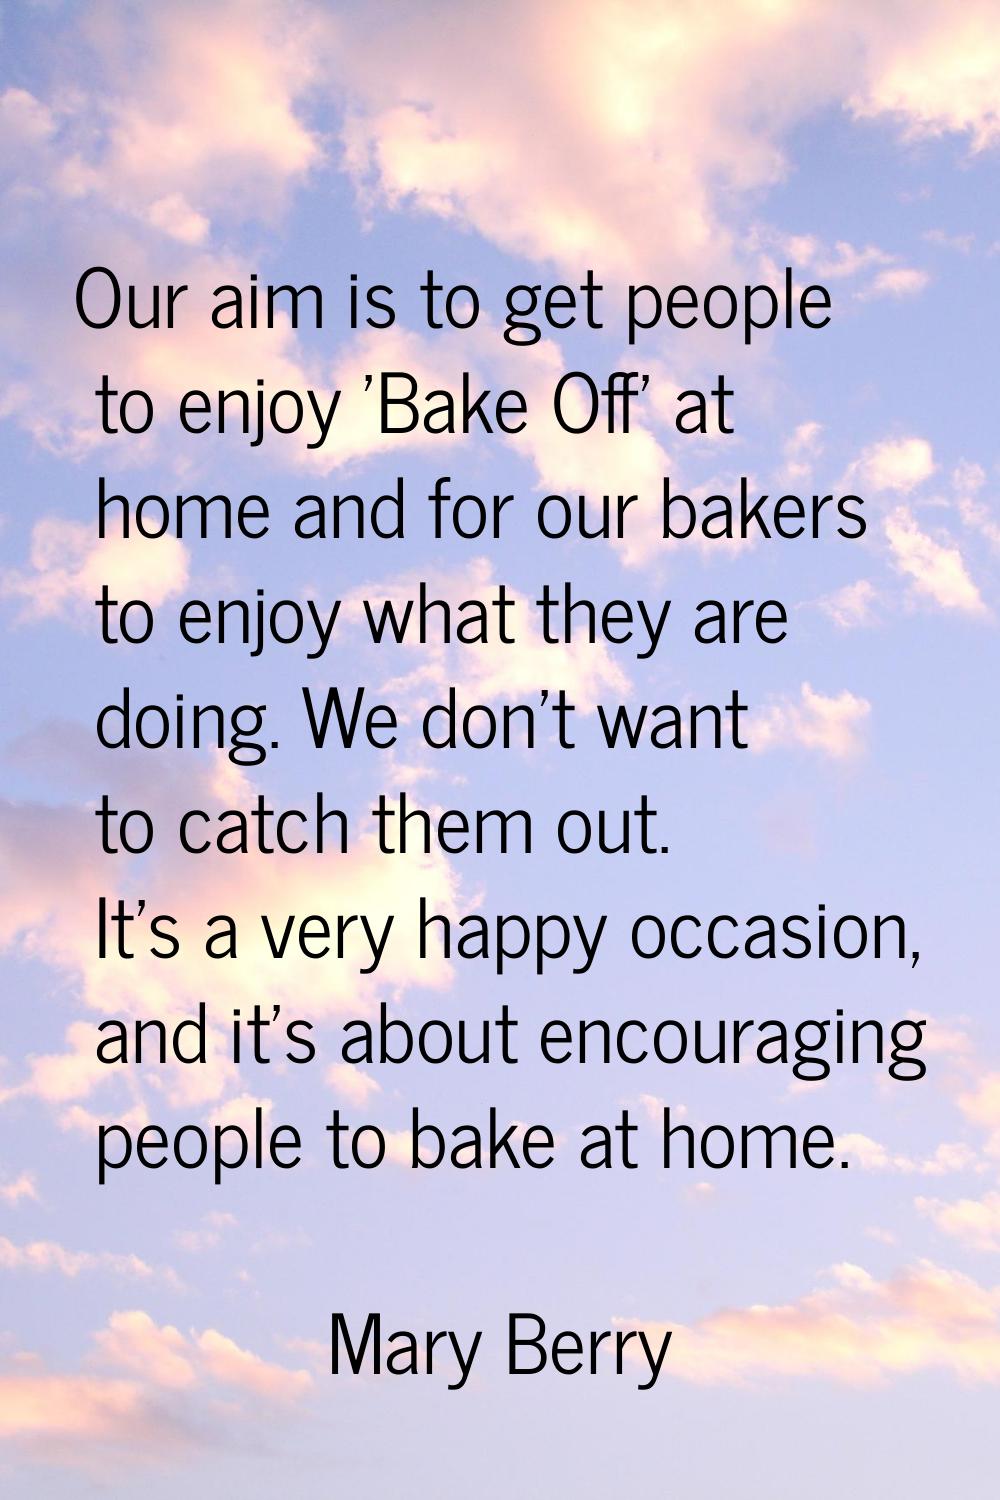 Our aim is to get people to enjoy 'Bake Off' at home and for our bakers to enjoy what they are doin